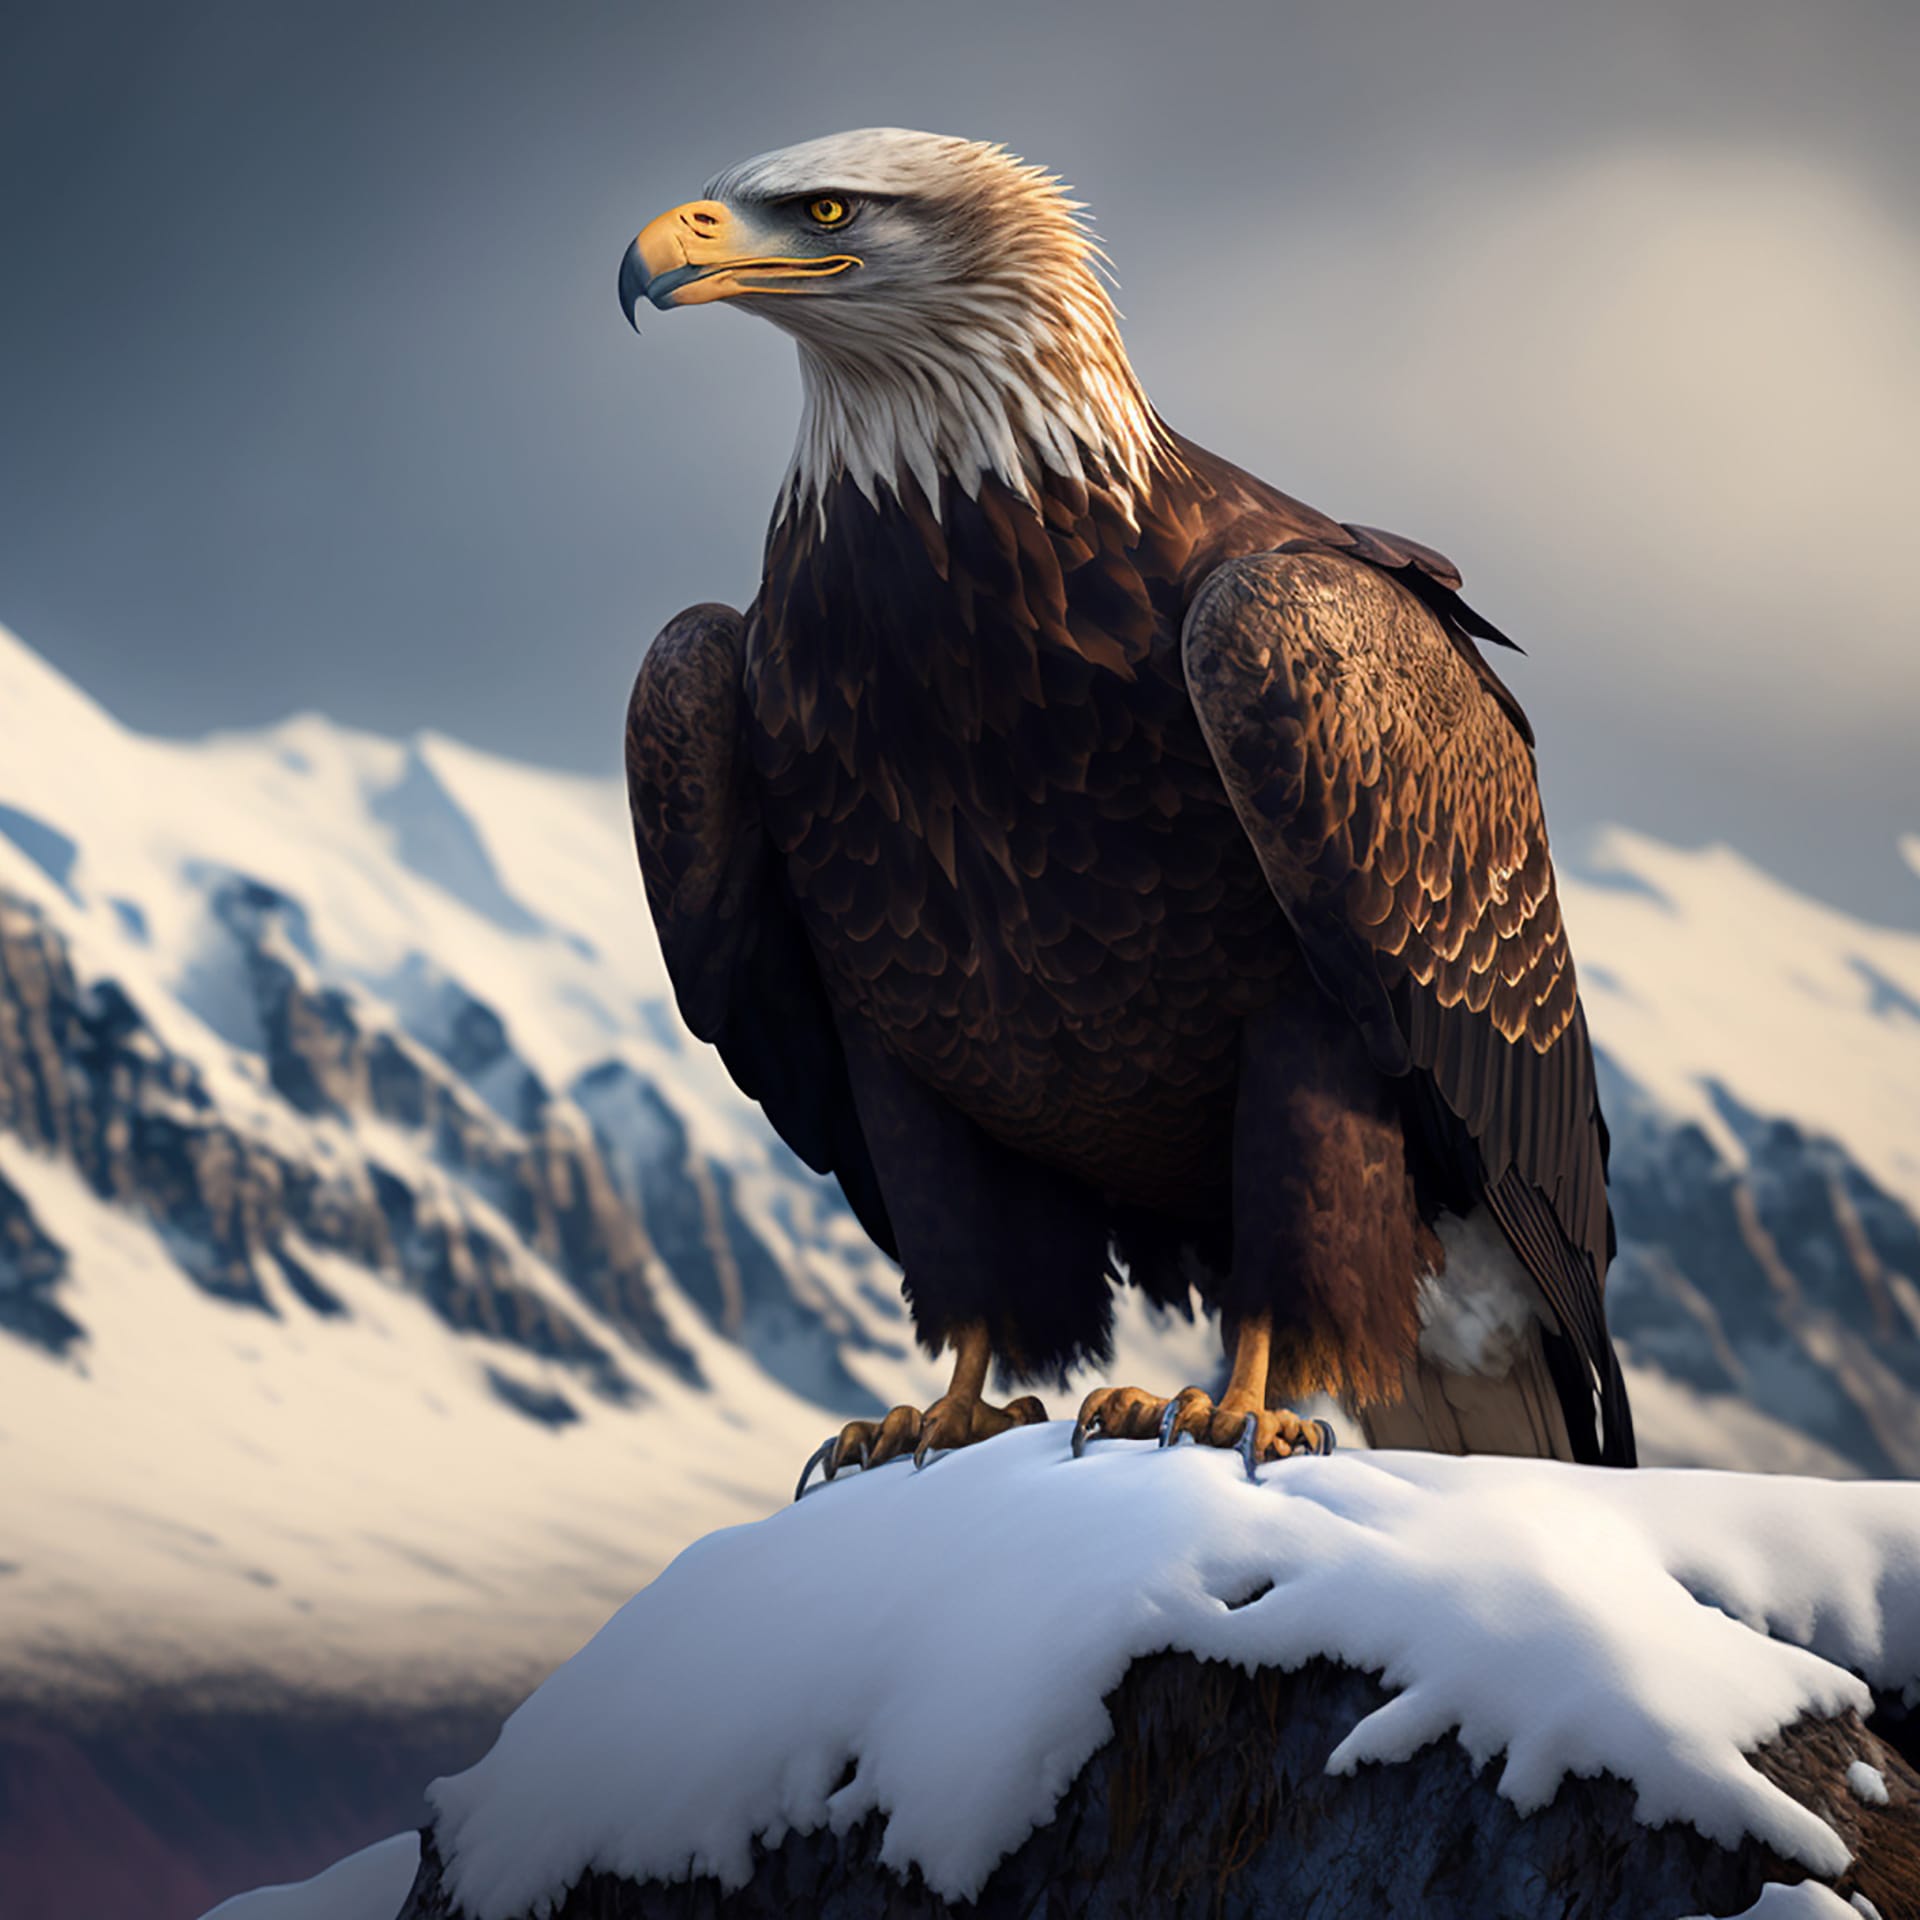 Majestic eagle perched atop snow capped mountain surveying landscape